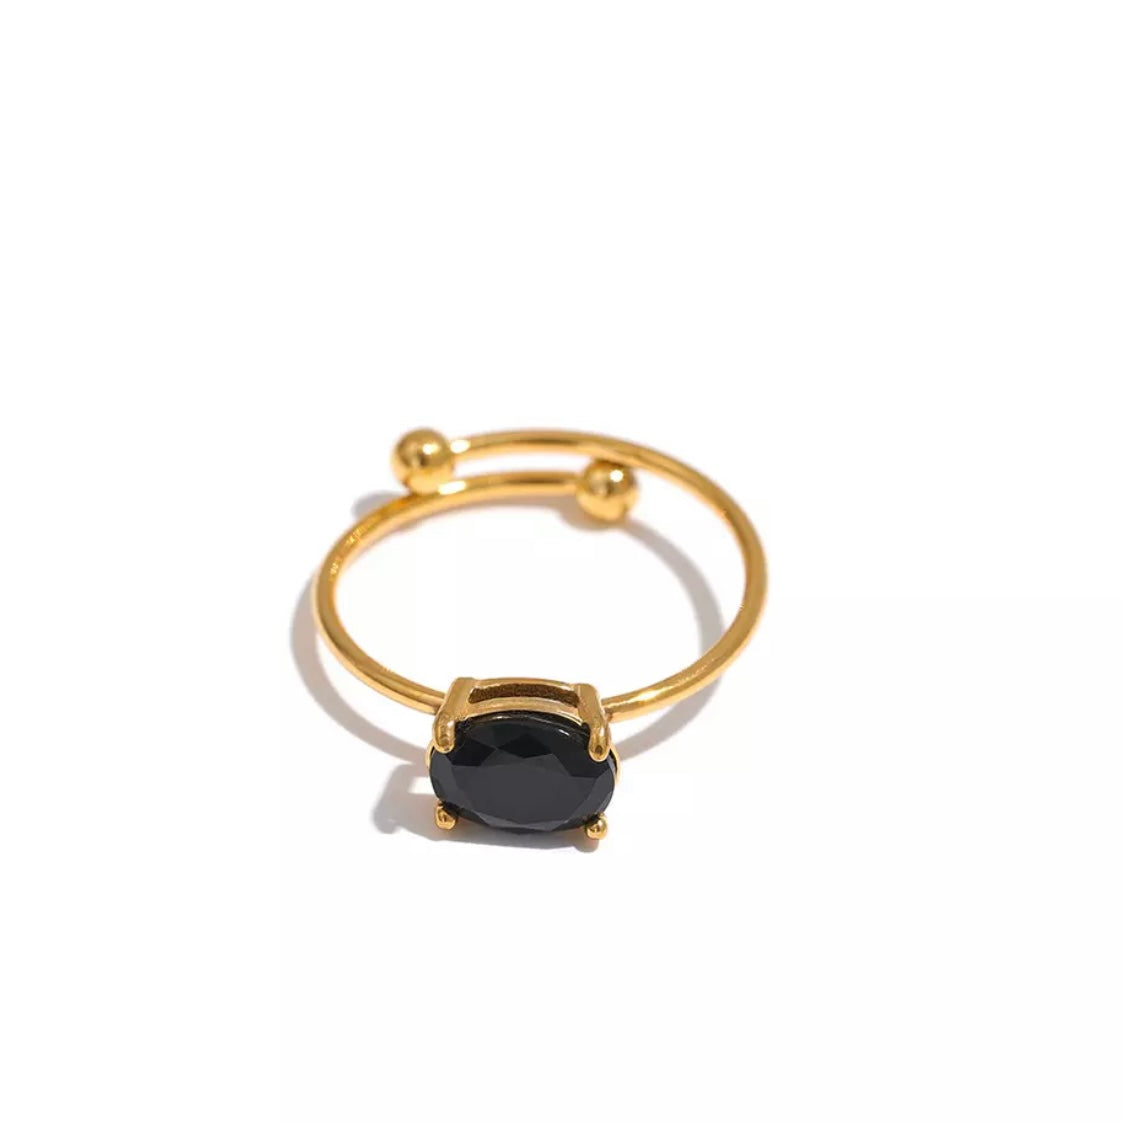 Minimalist thin gold ring band with a delicate and dainty design, perfect for adding a touch of elegance to your everyday look